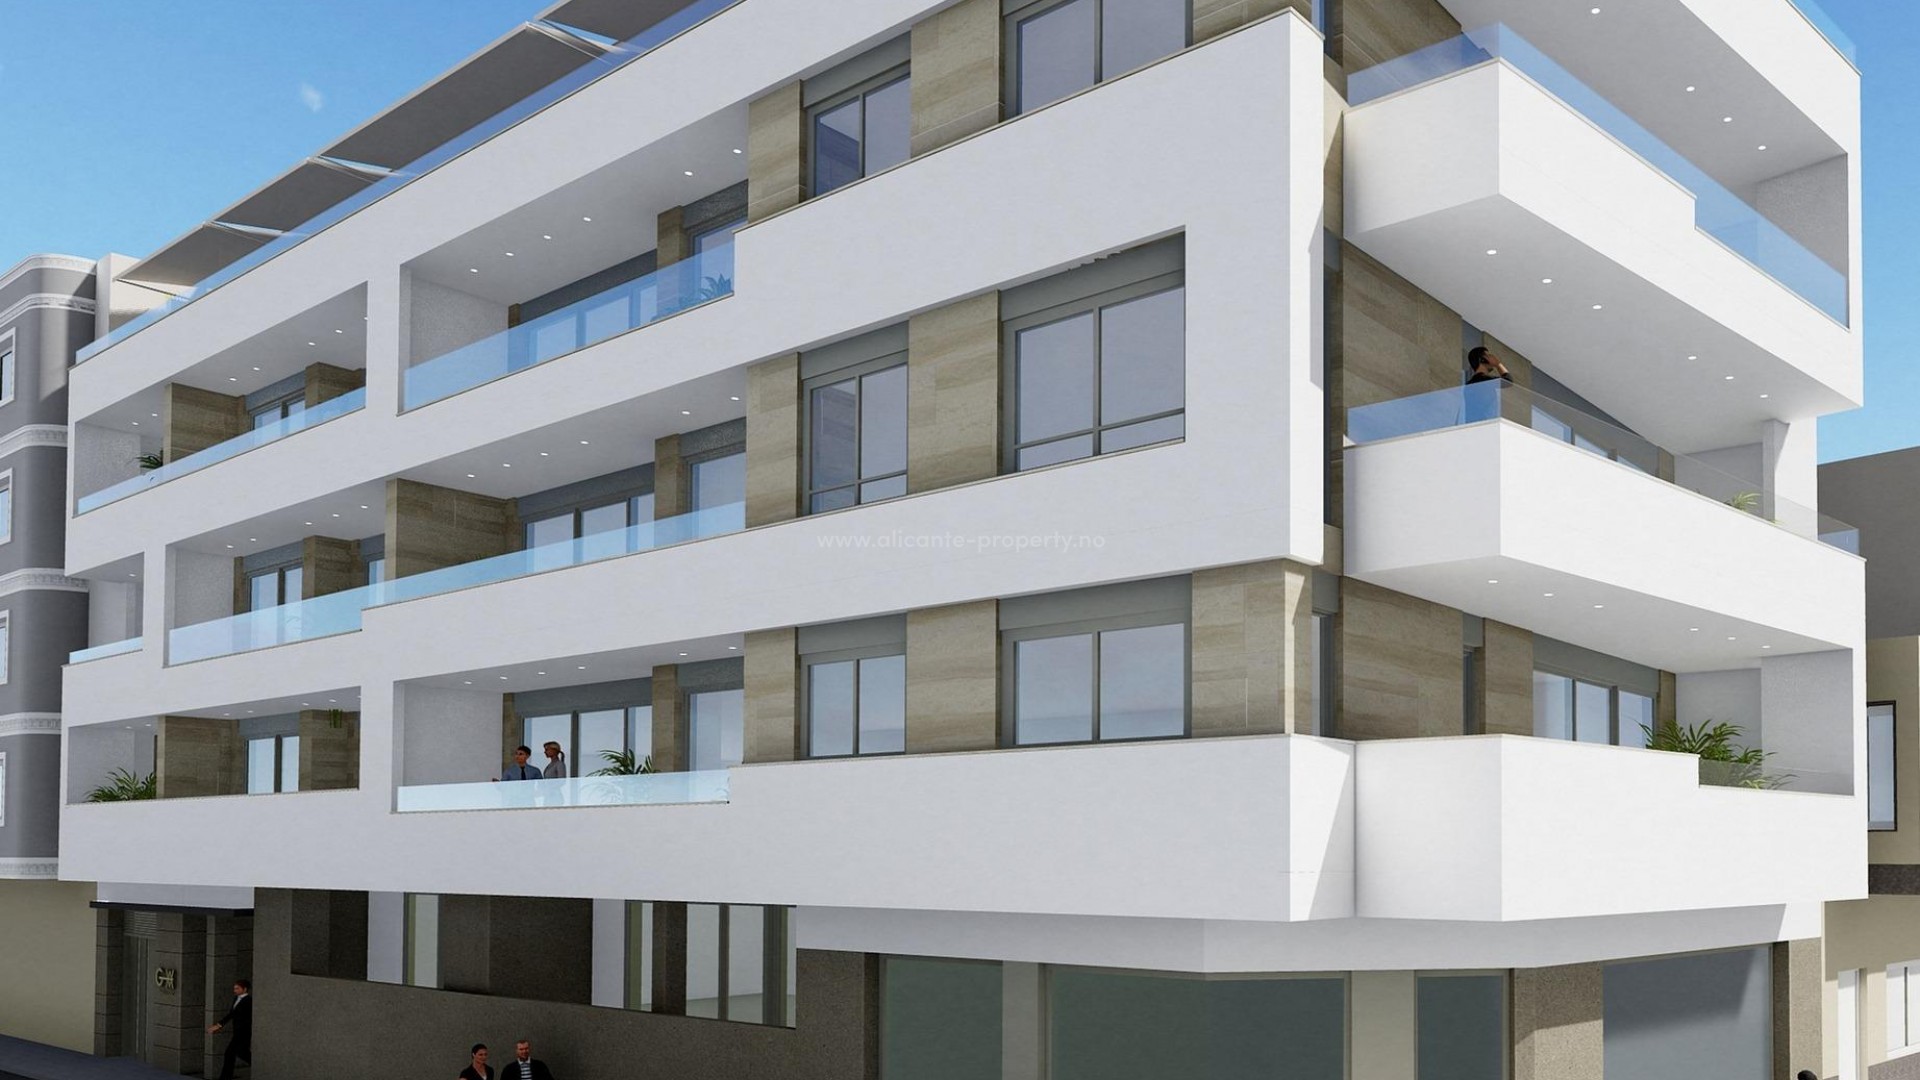 New homes in Torrevieja, 1/2/3 bedrooms, 1/2 bathrooms, close to Los Locos beach, all with terraces from 7m2 to 55m2, shared solarium, hot tub, sauna